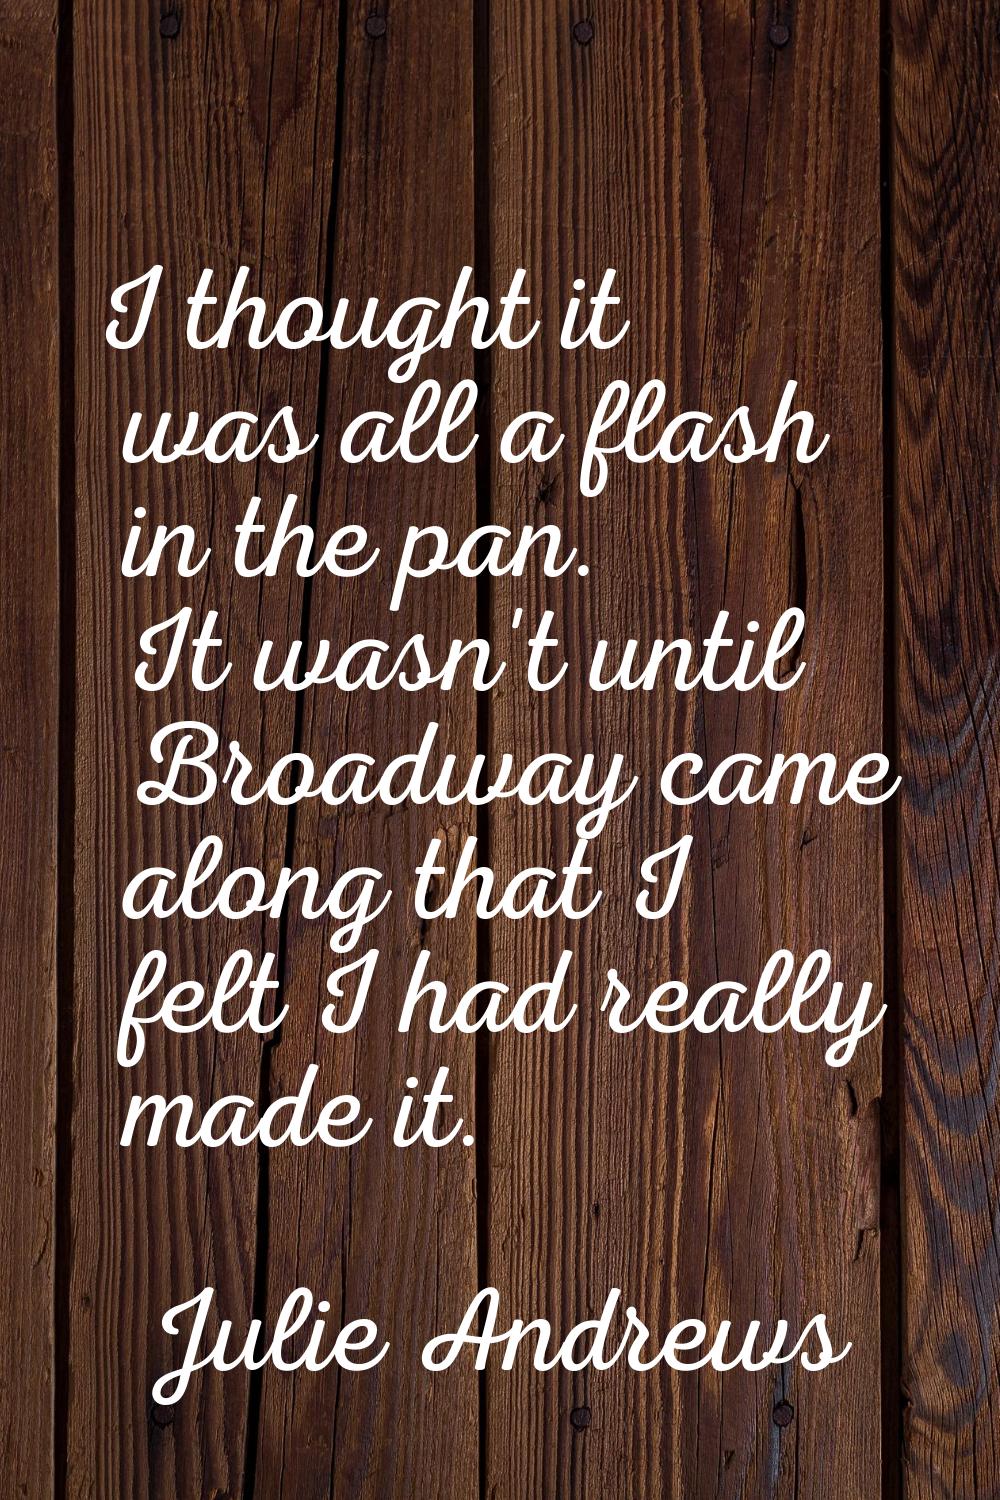 I thought it was all a flash in the pan. It wasn't until Broadway came along that I felt I had real